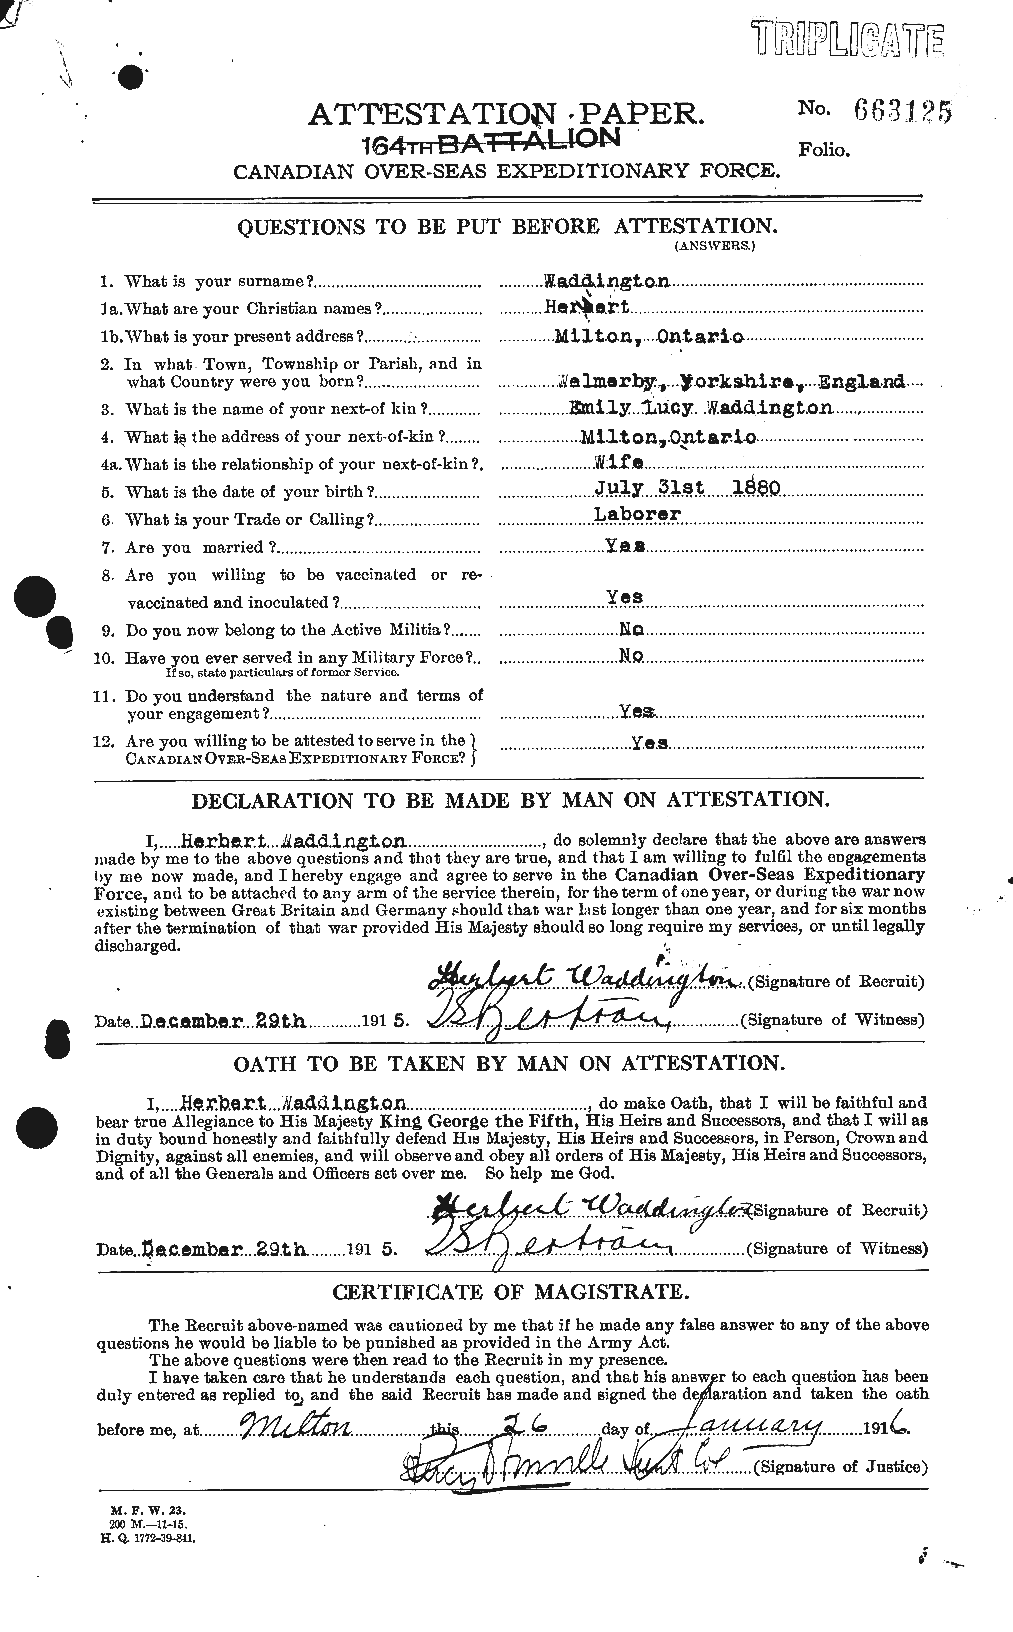 Personnel Records of the First World War - CEF 649943a